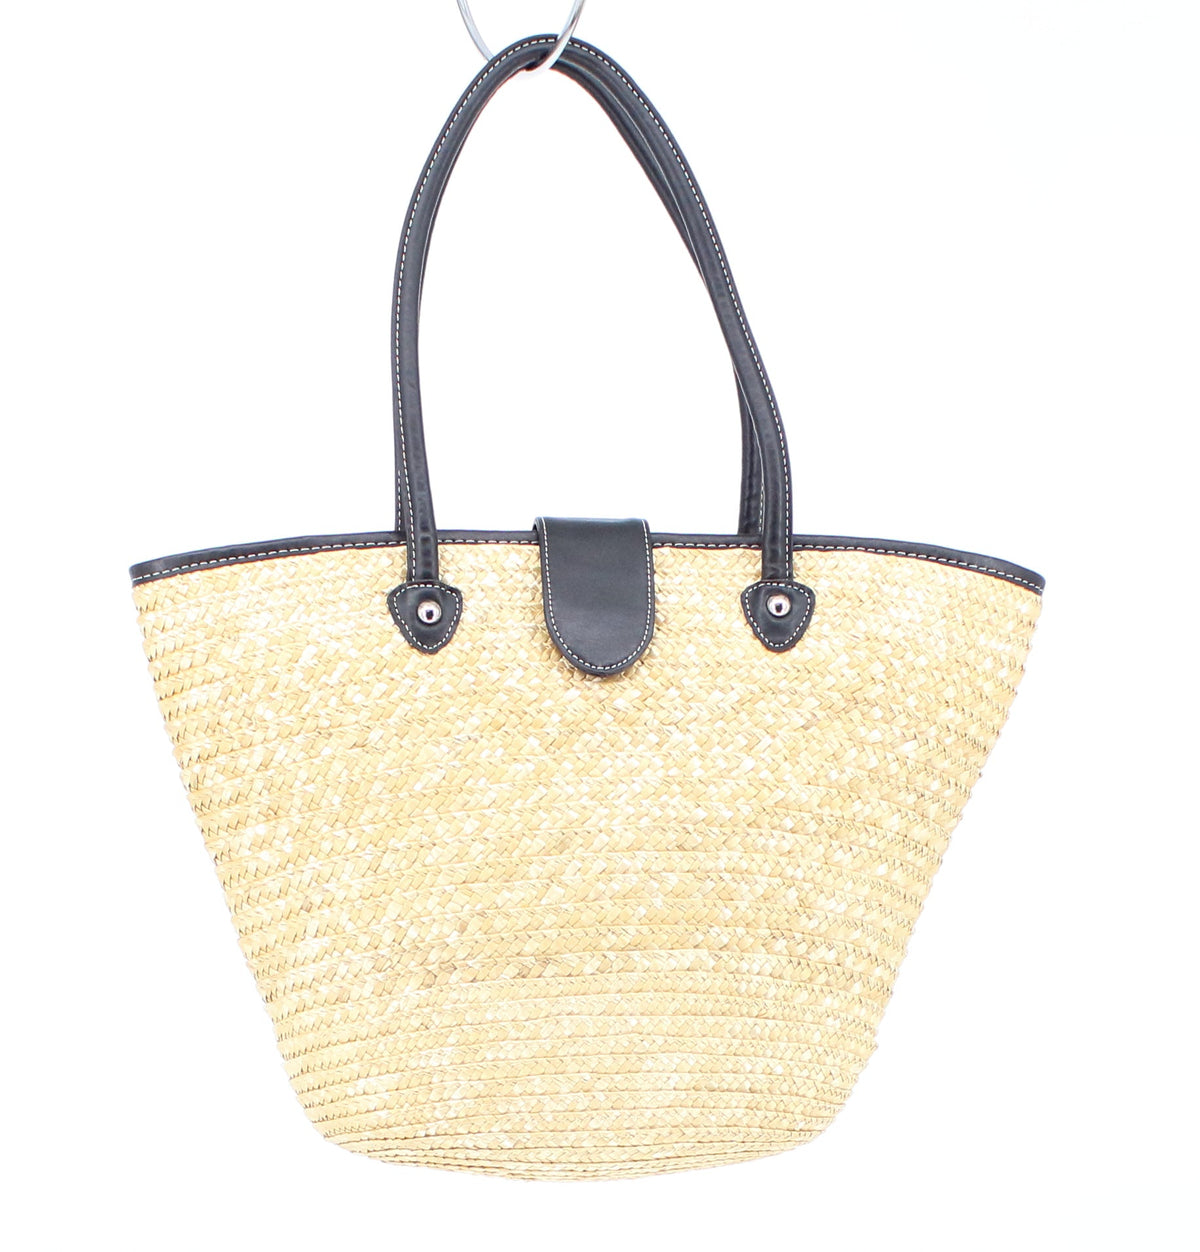 Beige Straw Tote Bag With Black Leather Straps And Snap Closure